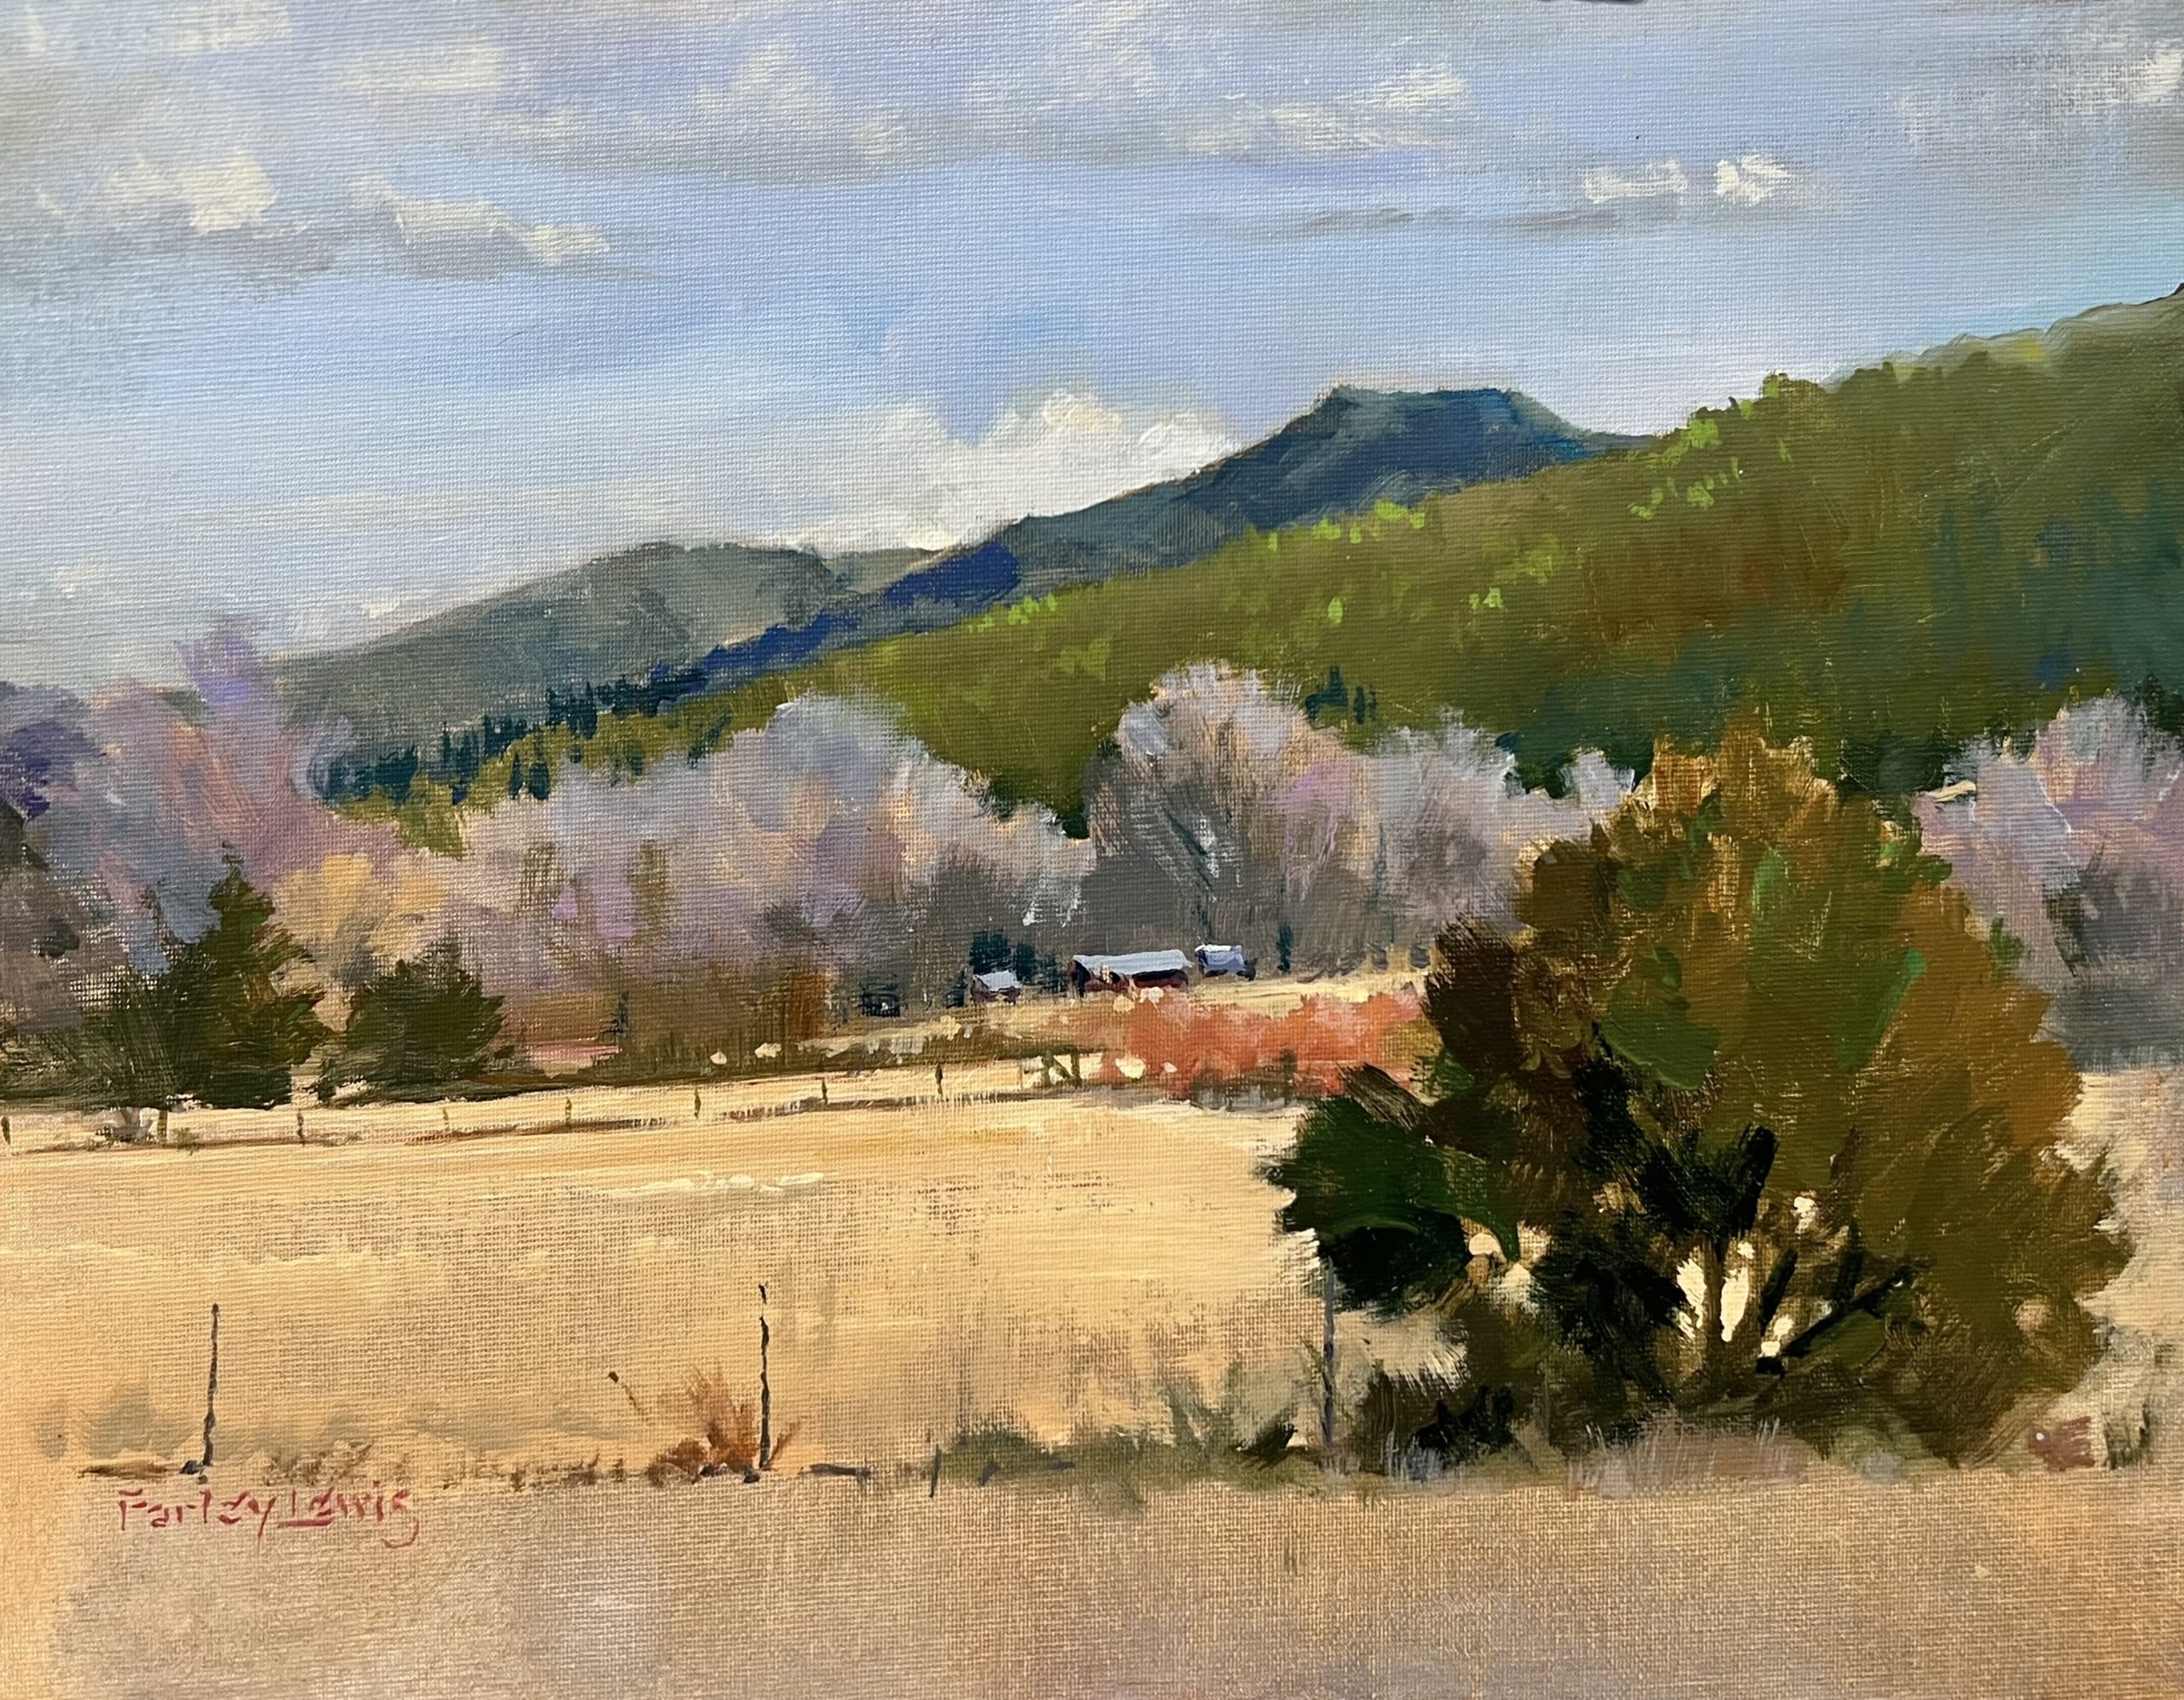 10. Farley Lewis, "Road to Taos," 2021, acrylic, 11 x 14 in., Available from artist, Studio